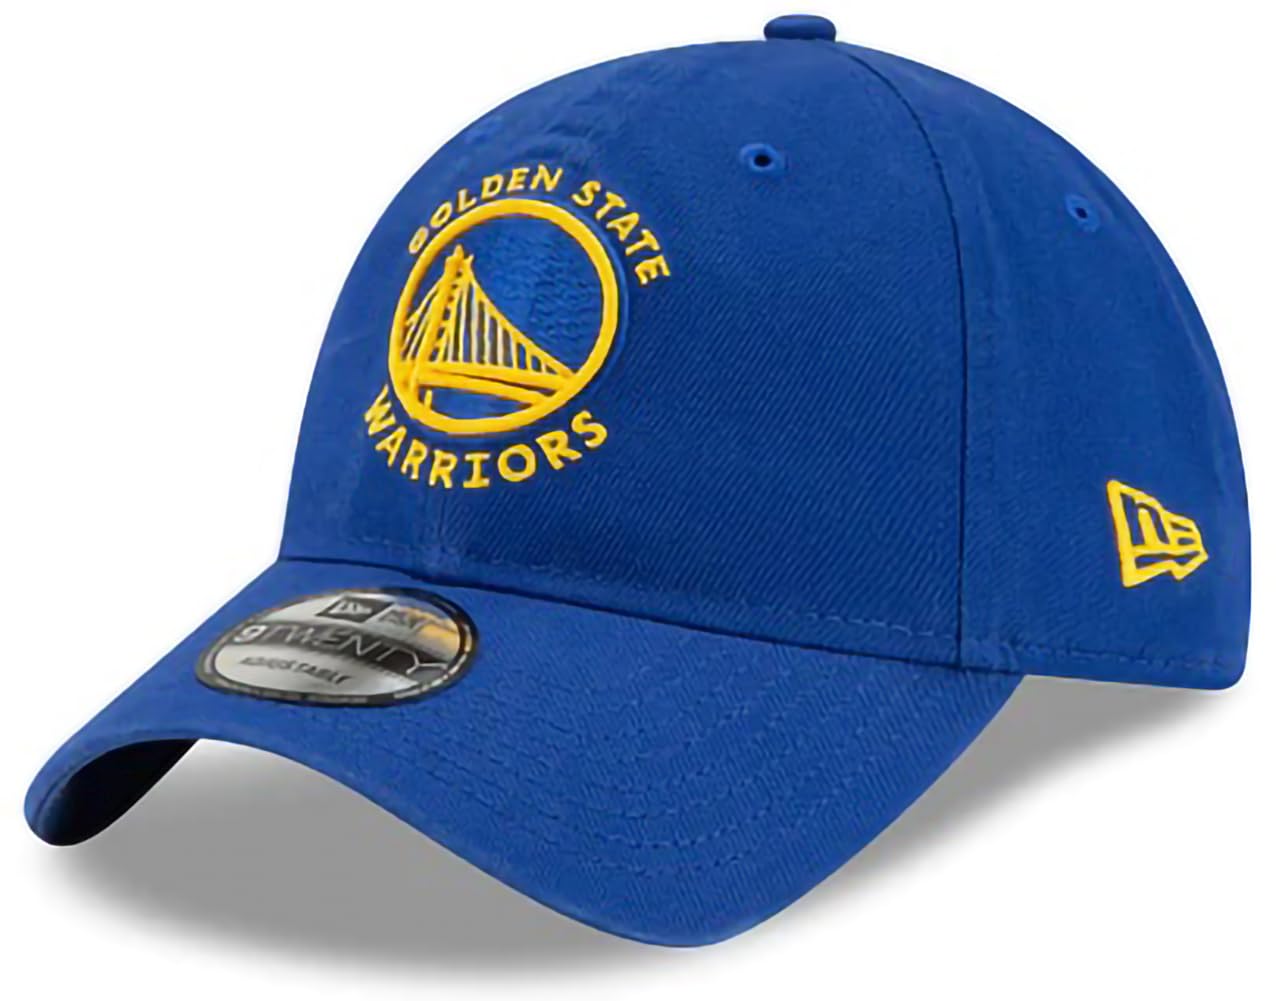 New Era NBA Core Classic 9TWENTY Adjustable Hat Cap One Size Fits All (Golden State Warriors) - Caps Fitted Caps Fitted New Era